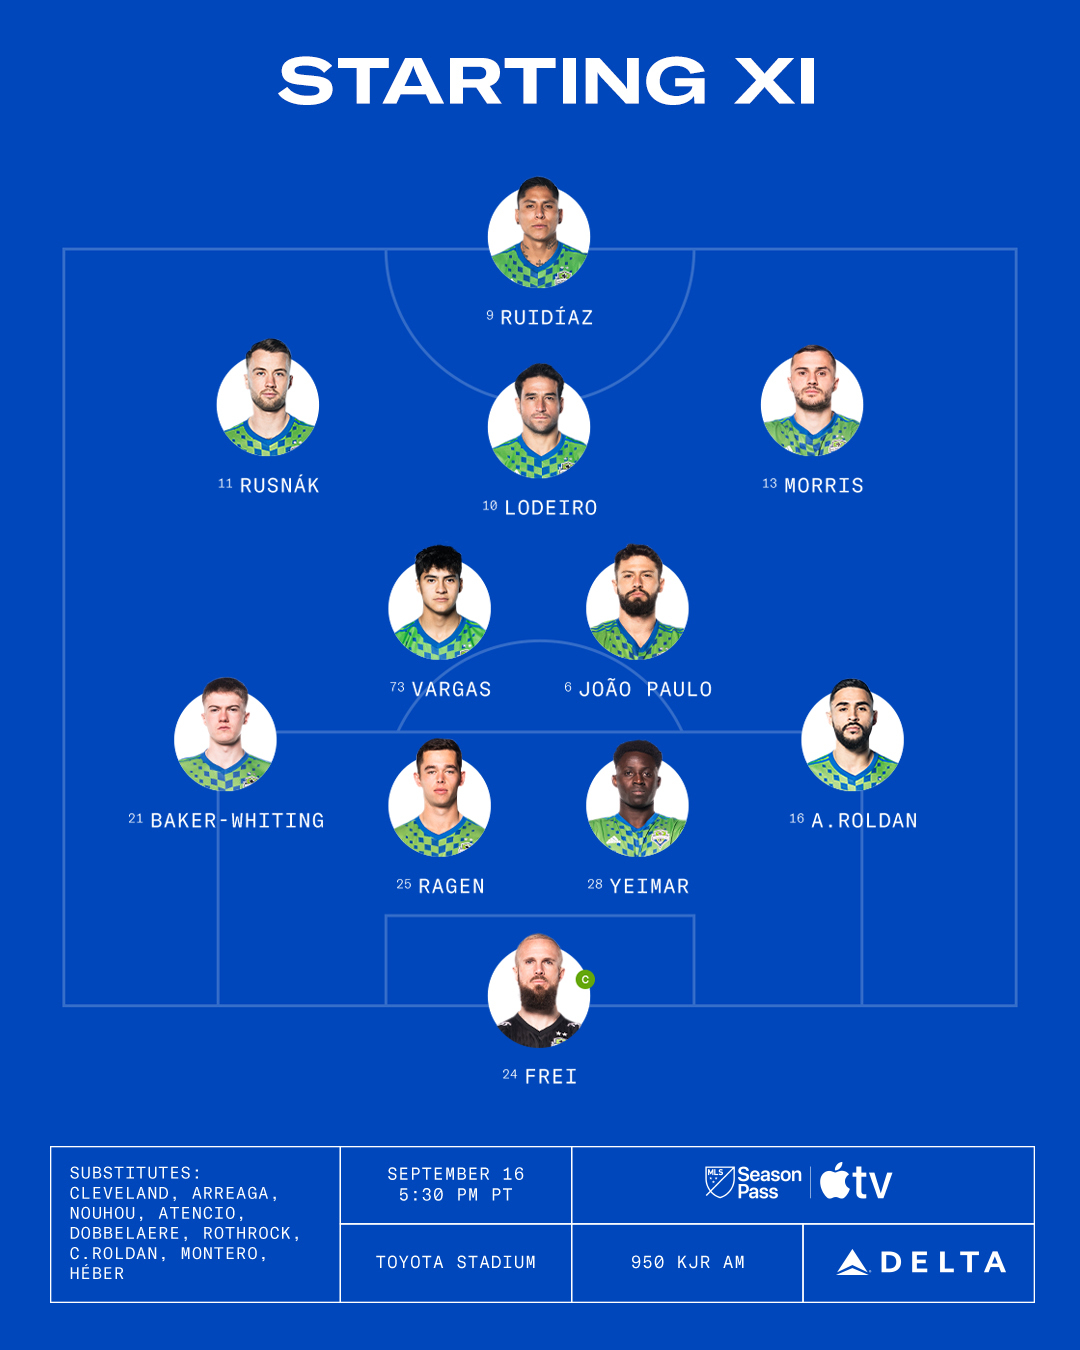 Sounders FC unveils results for Best XI campaign